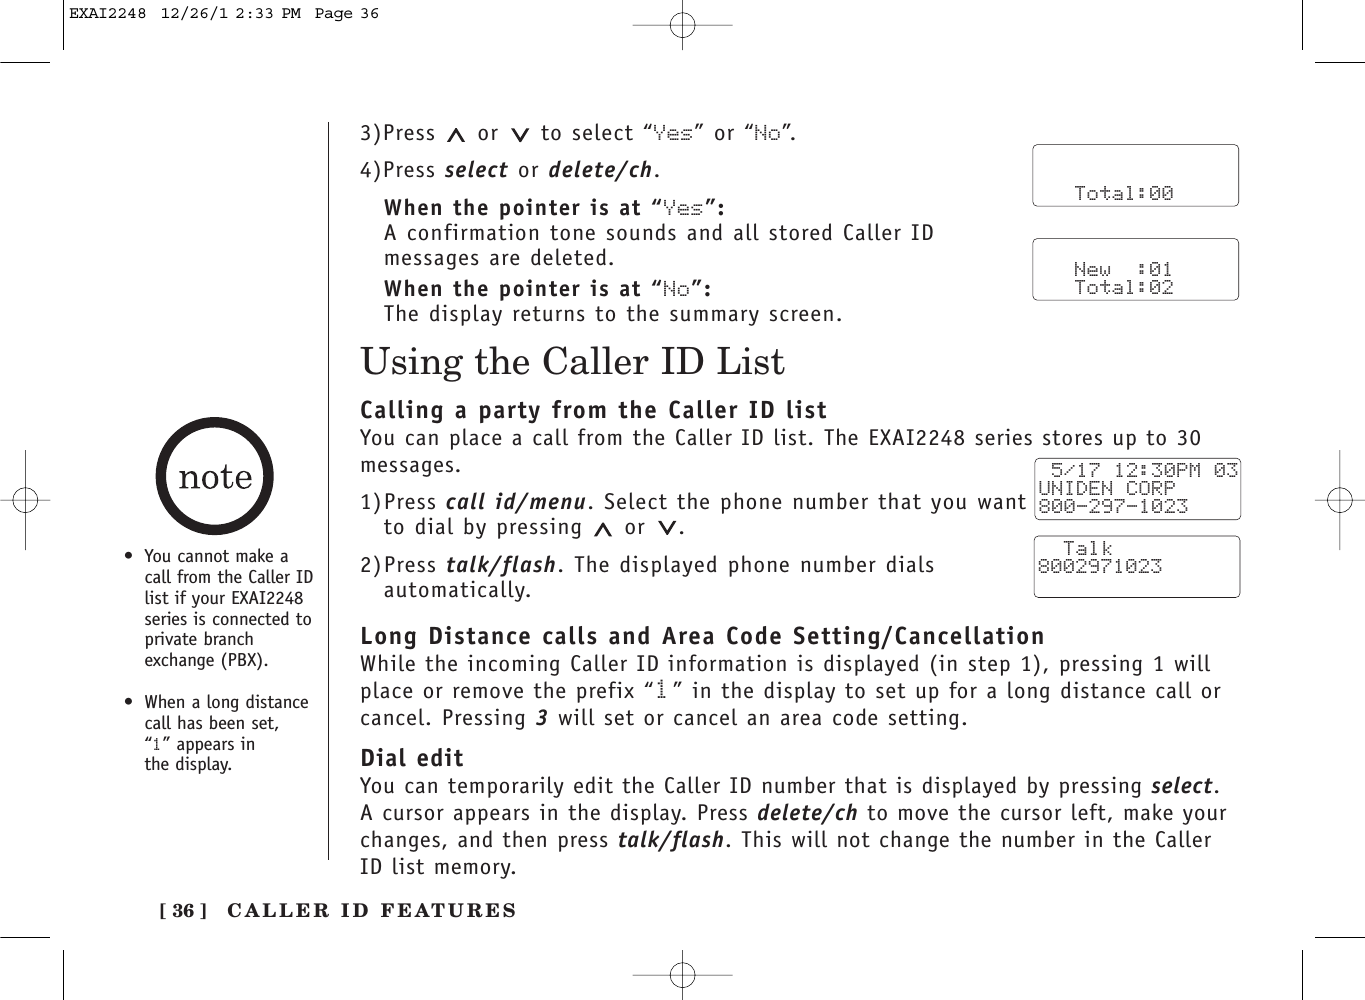 [ 36 ]Using the Caller ID List•You cannot make acall from the Caller IDlist if your EXAI2248series is connected toprivate branchexchange (PBX).•When a long distancecall has been set, “1” appears in the display.3)Press or to select “Yes” or “No”.4)Press select or delete/ch.When the pointer is at “Yes”:A confirmation tone sounds and all stored Caller IDmessages are deleted.When the pointer is at “No”:The display returns to the summary screen.      Total:00   New  :01   Total:02Calling a party from the Caller ID listYou can place a call from the Caller ID list. The EXAI2248 series stores up to 30messages.1)Press call id/menu. Select the phone number that you wantto dial by pressing  or .2)Press talk/flash. The displayed phone number dialsautomatically.Long Distance calls and Area Code Setting/CancellationWhile the incoming Caller ID information is displayed (in step 1), pressing 1 willplace or remove the prefix “1”in the display to set up for a long distance call orcancel. Pressing 3will set or cancel an area code setting.Dial editYou can temporarily edit the Caller ID number that is displayed by pressing select.A cursor appears in the display. Press delete/ch to move the cursor left, make yourchanges, and then press talk/flash. This will not change the number in the CallerID list memory.  5/17 12:30PM 03UNIDEN CORP800-297-1023  Talk8002971023CALLER ID FEATURESEXAI2248  12/26/1 2:33 PM  Page 36